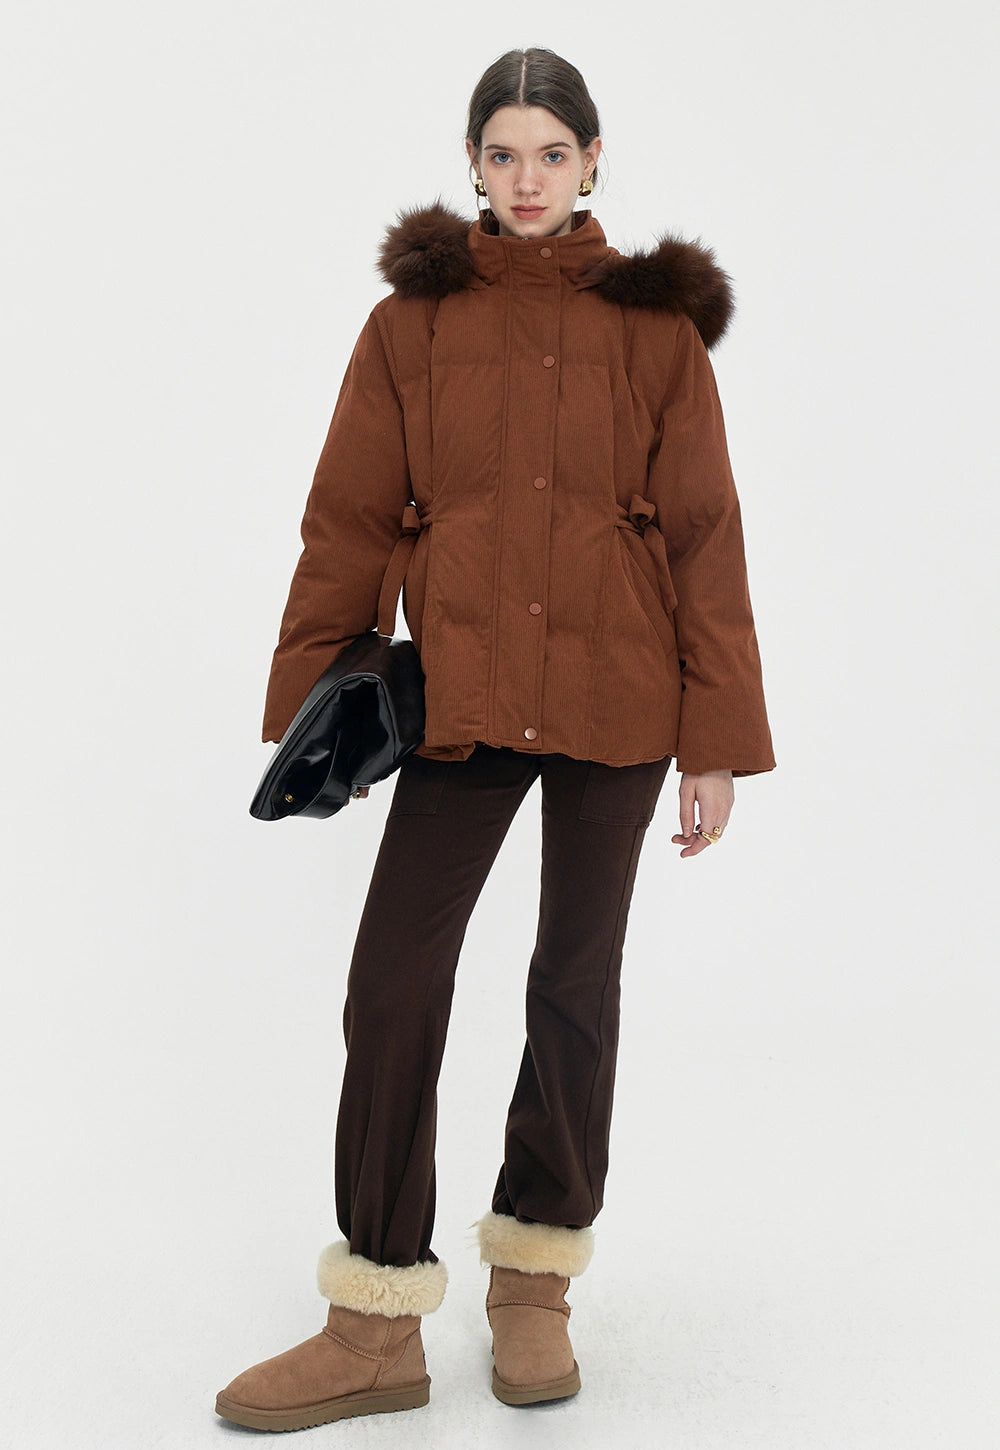 Women's Brown Hooded Padded Cotton Jacket with Fur Trim